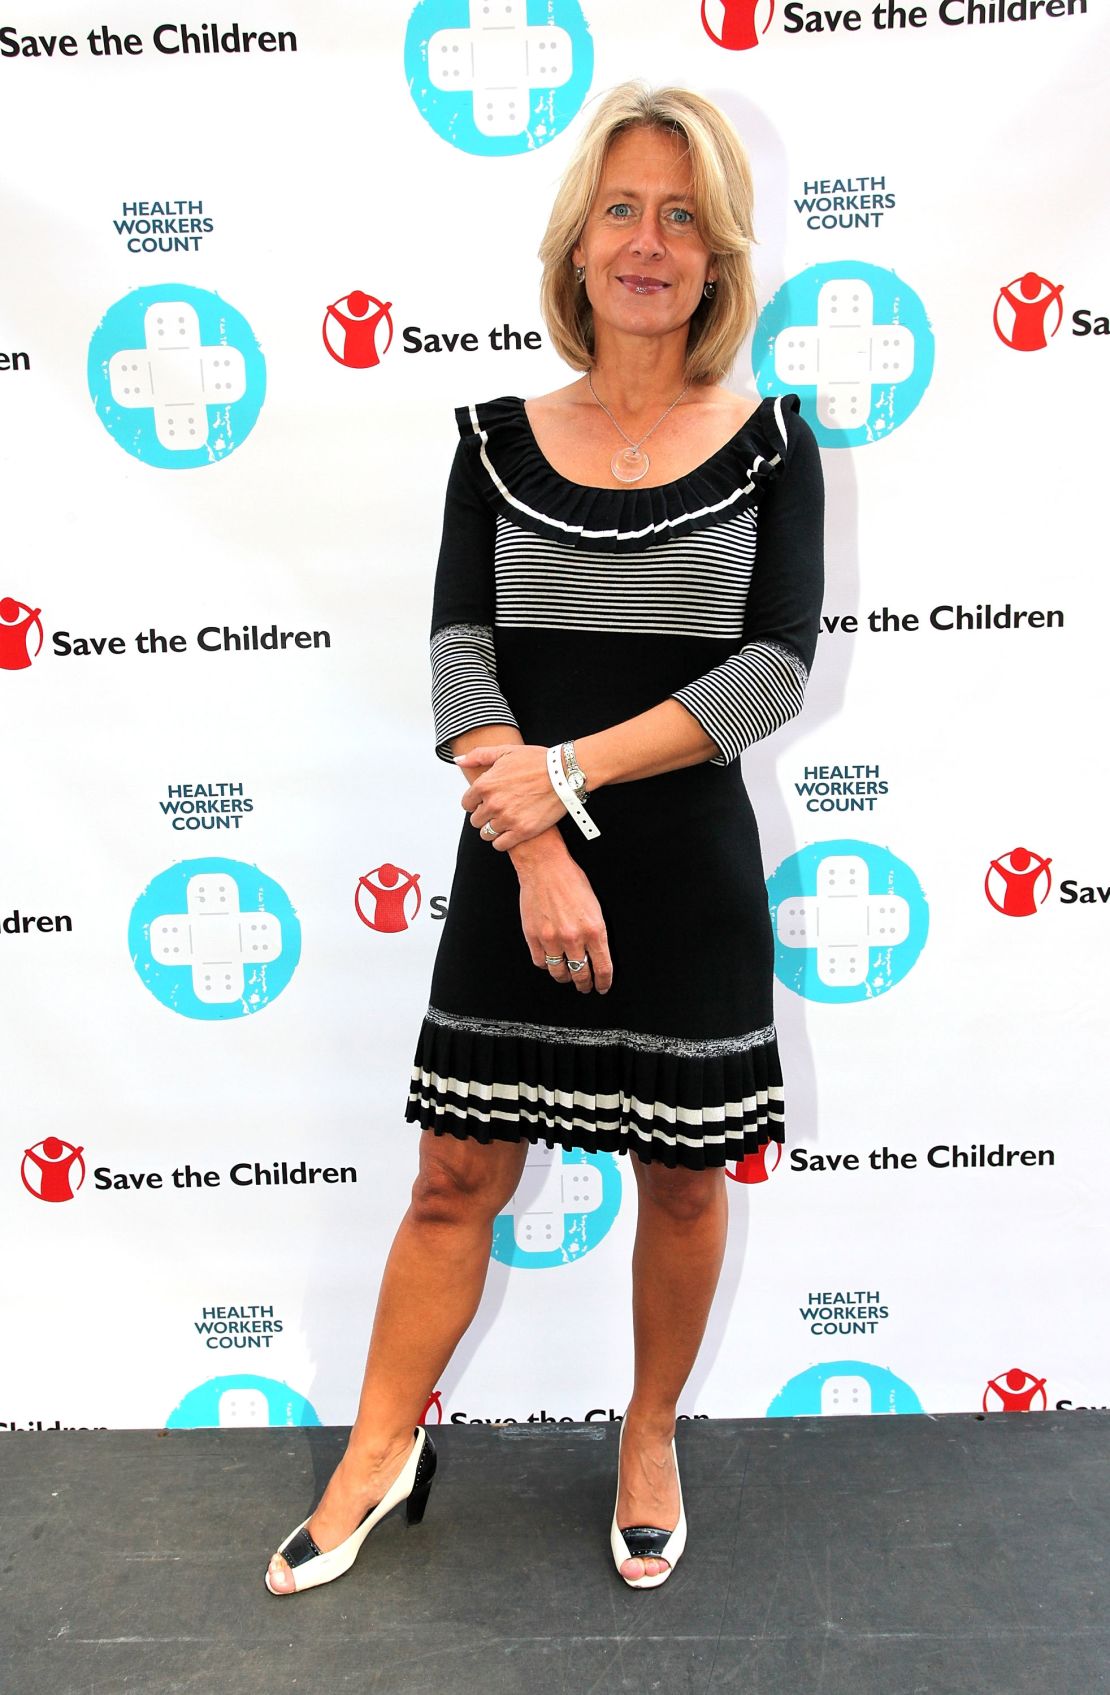 Jasmine Whitbread, the first international chief executive of Save the Children